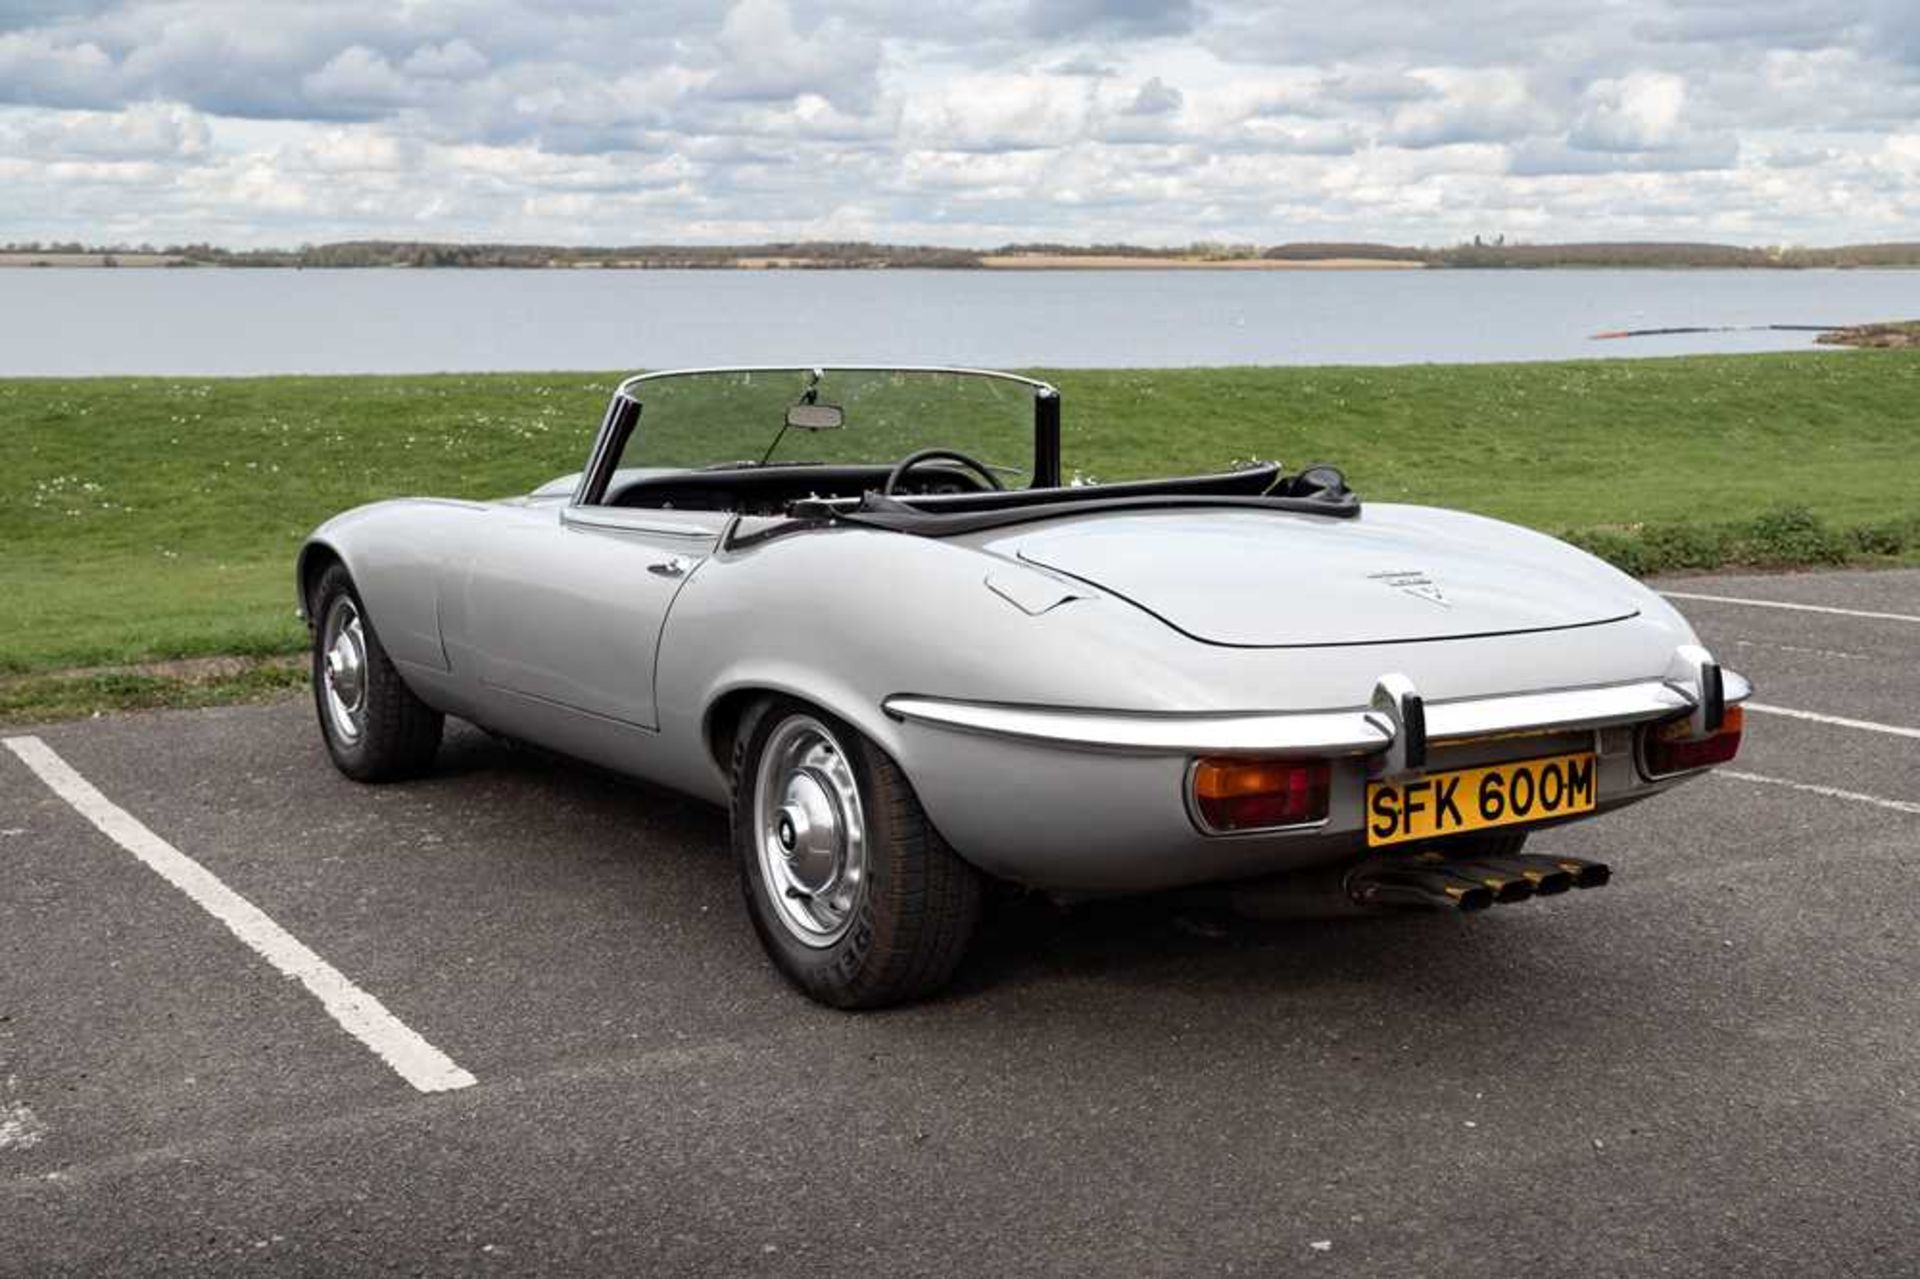 1974 Jaguar E-Type Series III V12 Roadster Only one family owner and 54,412 miles from new - Image 26 of 89